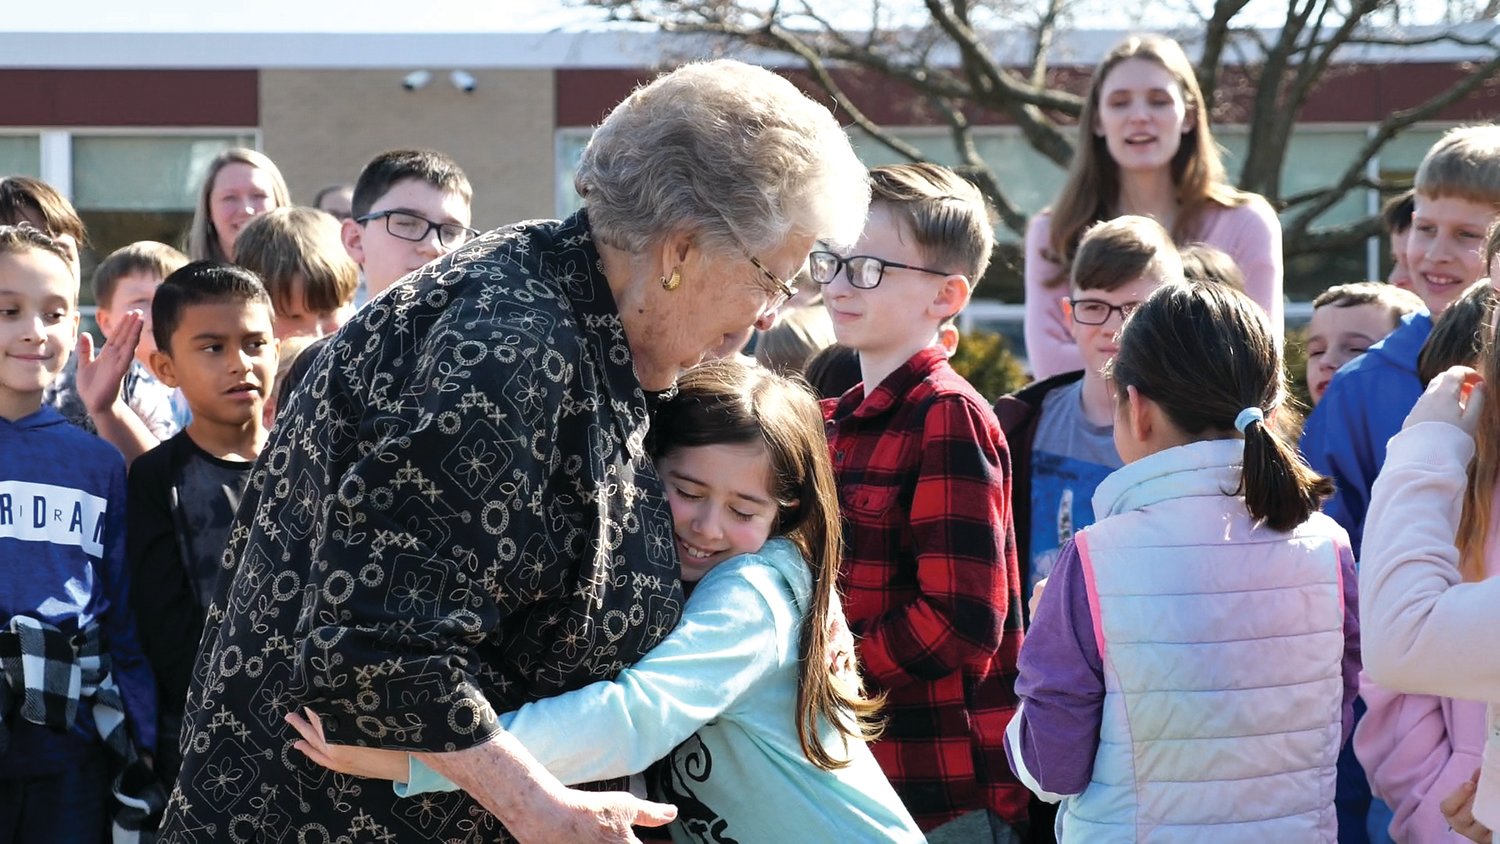 Dr. Patricia A. Guth accepts a hug from a student upon her recent return to the Pennridge Elementary School that bears her name.